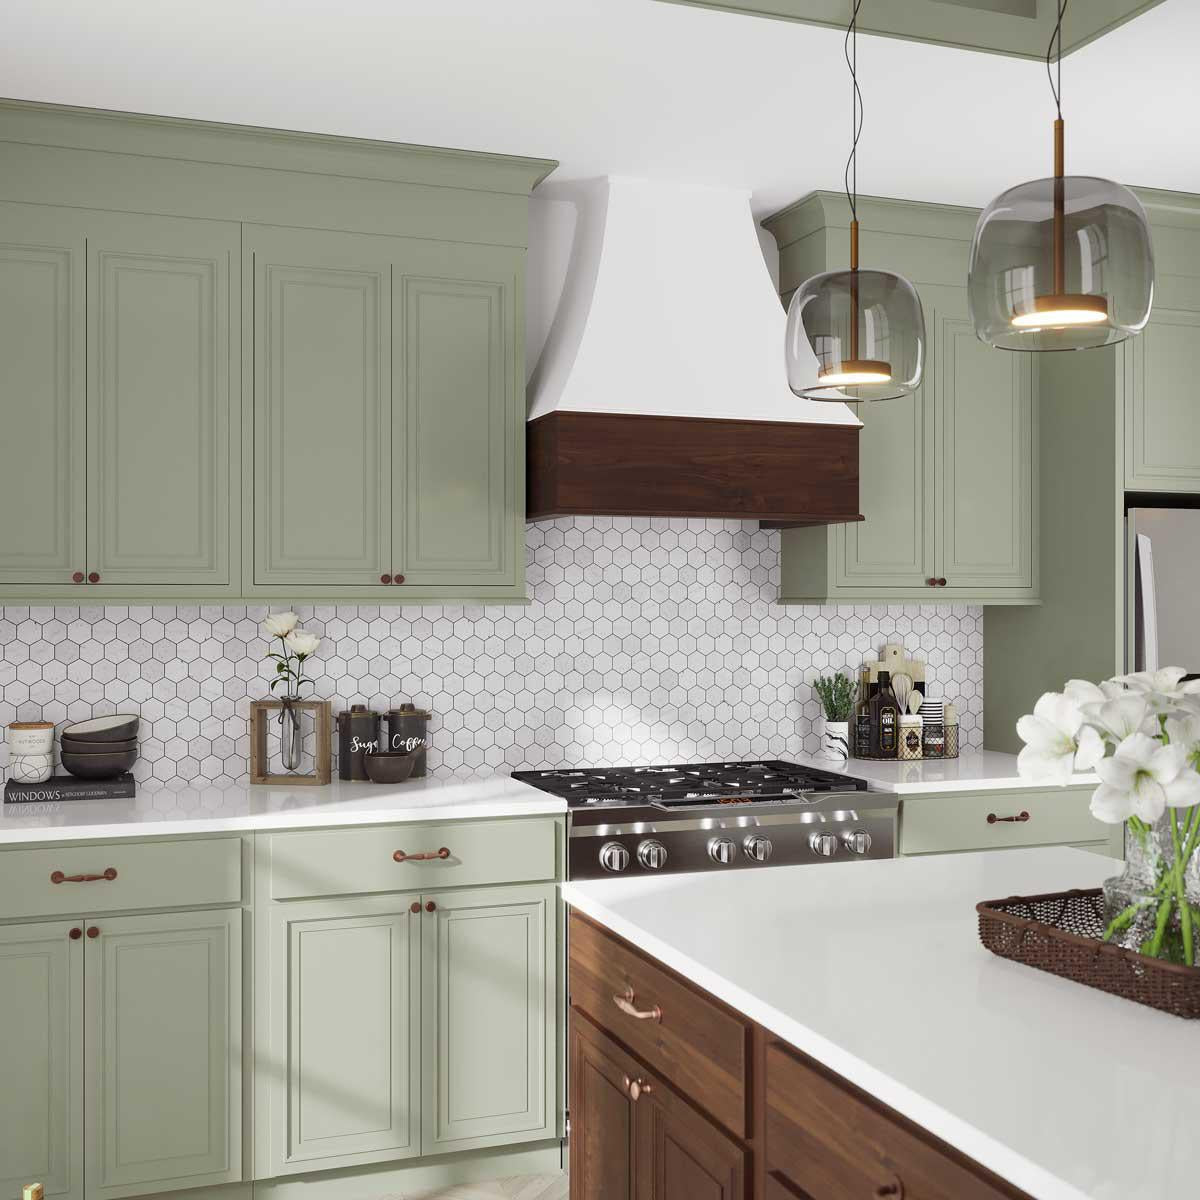 Green and natural wood kitchen design with Carrara marble hexagon tiles